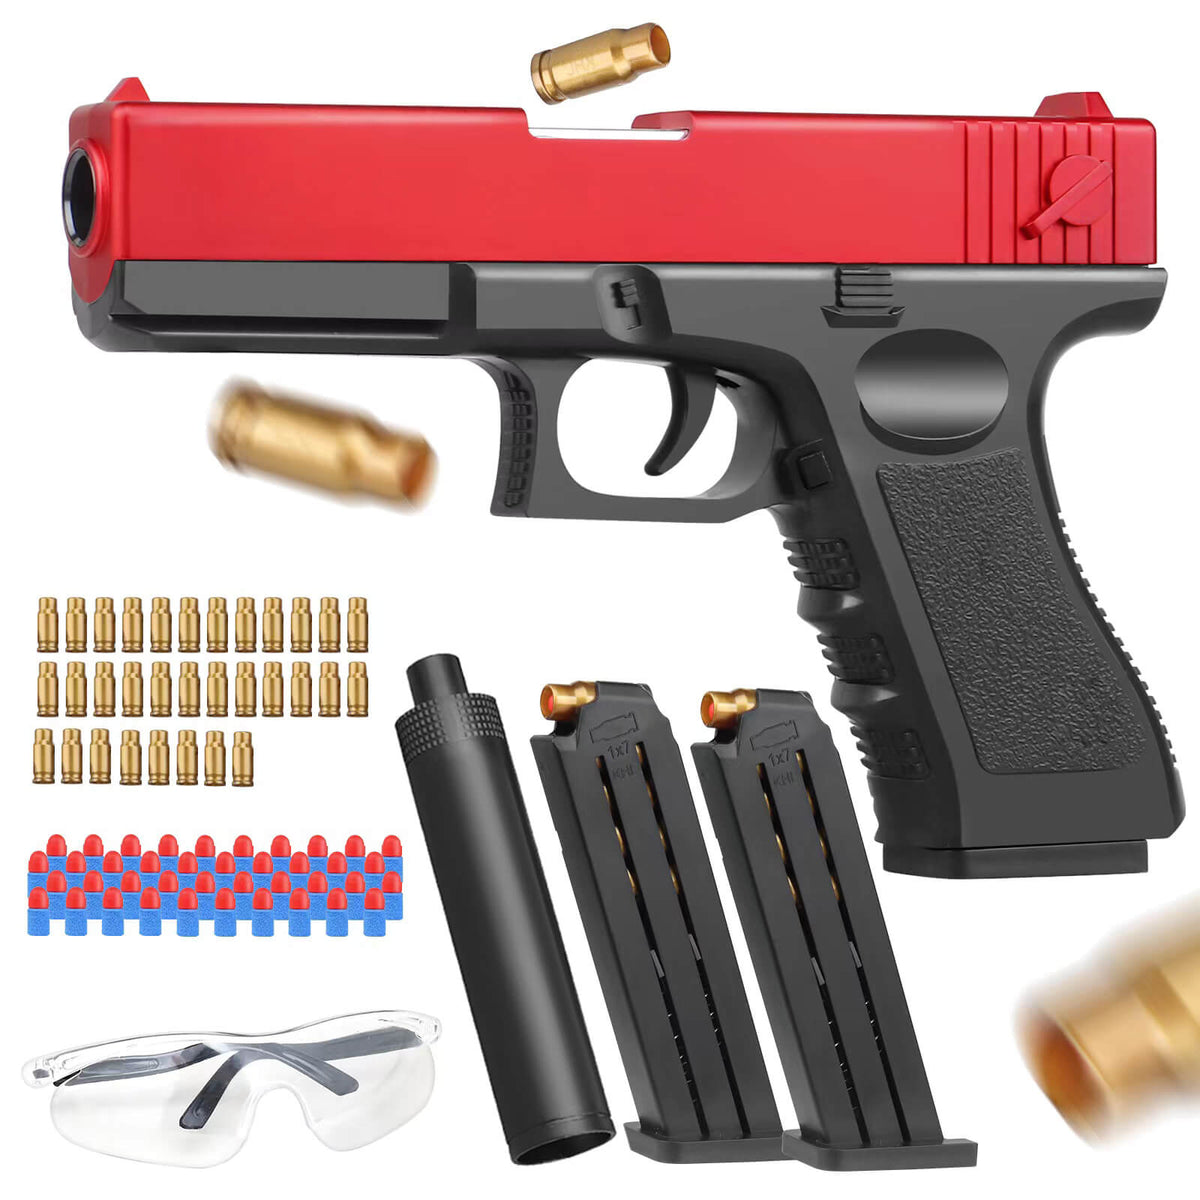 (Special Sales) Toy Gun Jump Ejectinging Magazine, Soft Bullets & Pull Back Action, Pistol Toys Foam Blaster Soft Bullet Play Gun with 40 Pcs Darts, Education Toy Model for 6,7,8,9,15+ Kids Gifts